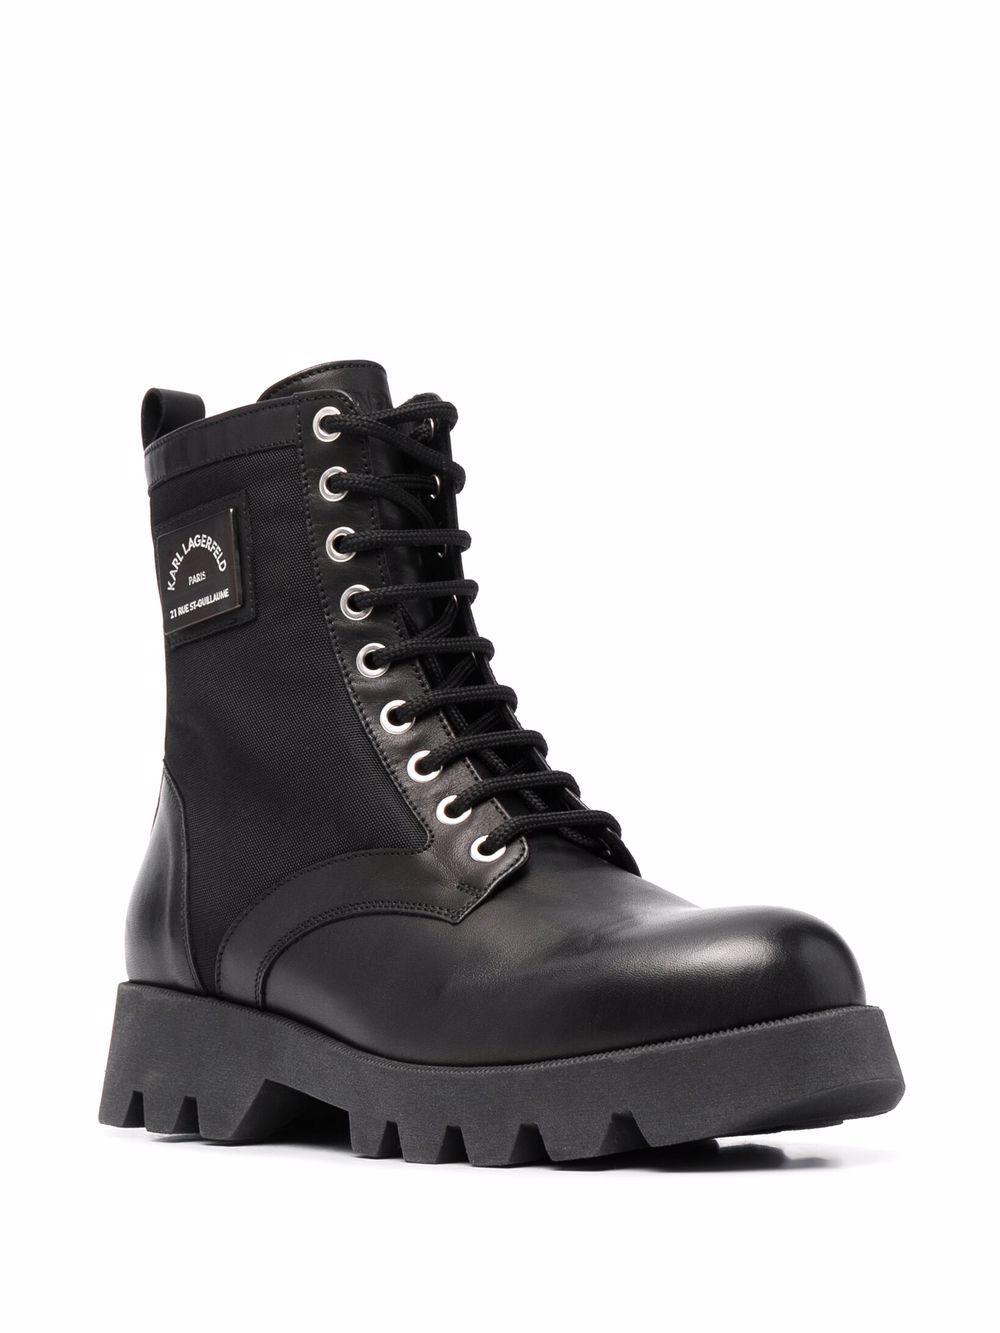 Shop Karl Lagerfeld Terra Firma lace-up boots with Express Delivery ...